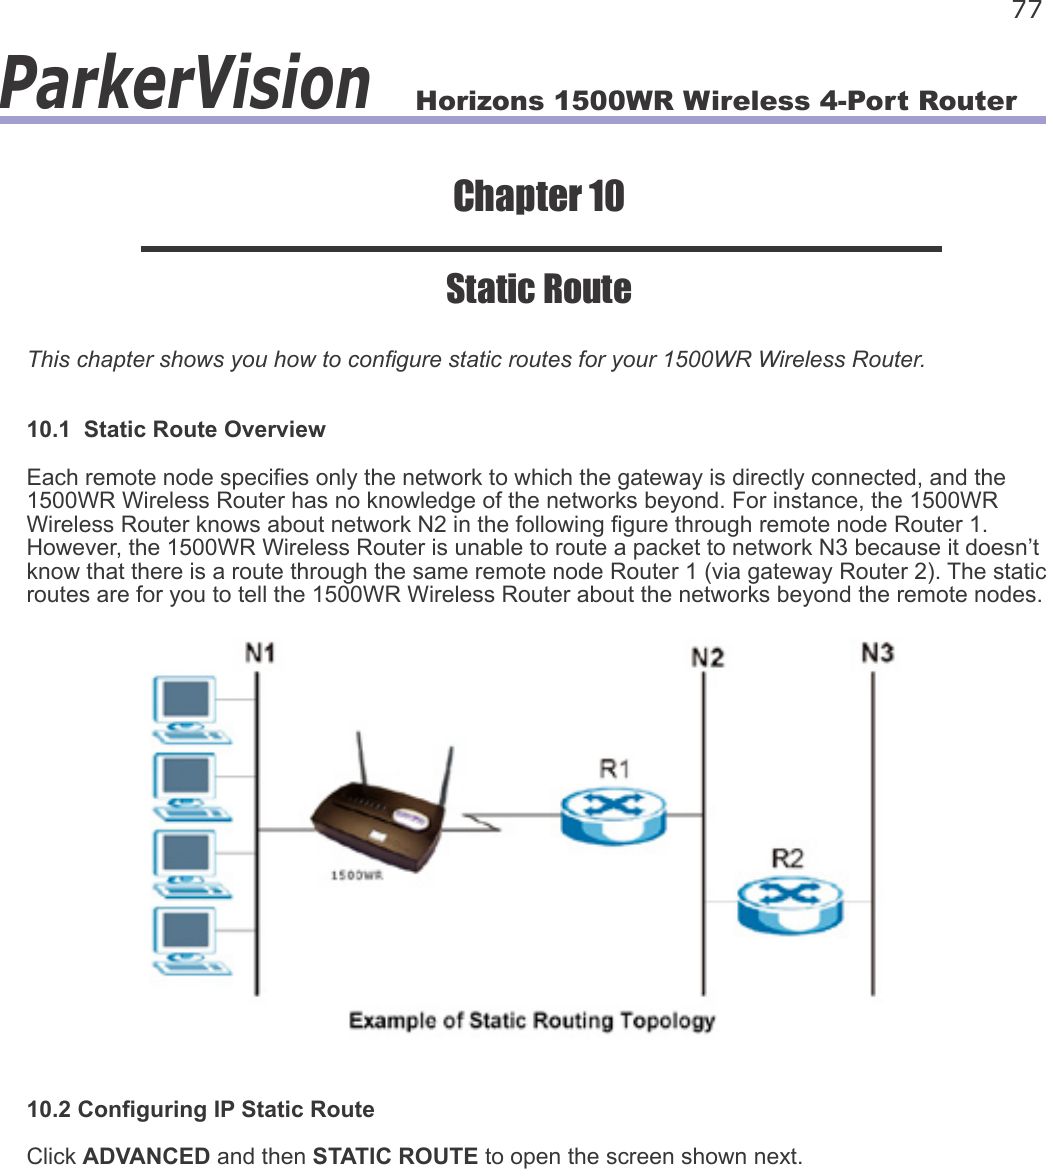 Horizons 1500WR Wireless 4-Port Router 77ParkerVisionChapter 10Static RouteThis chapter shows you how to congure static routes for your 1500WR Wireless Router.10.1  Static Route OverviewEach remote node species only the network to which the gateway is directly connected, and the 1500WR Wireless Router has no knowledge of the networks beyond. For instance, the 1500WR Wireless Router knows about network N2 in the following gure through remote node Router 1. However, the 1500WR Wireless Router is unable to route a packet to network N3 because it doesn’t know that there is a route through the same remote node Router 1 (via gateway Router 2). The static routes are for you to tell the 1500WR Wireless Router about the networks beyond the remote nodes.10.2 Conguring IP Static RouteClick ADVANCED and then STATIC ROUTE to open the screen shown next.